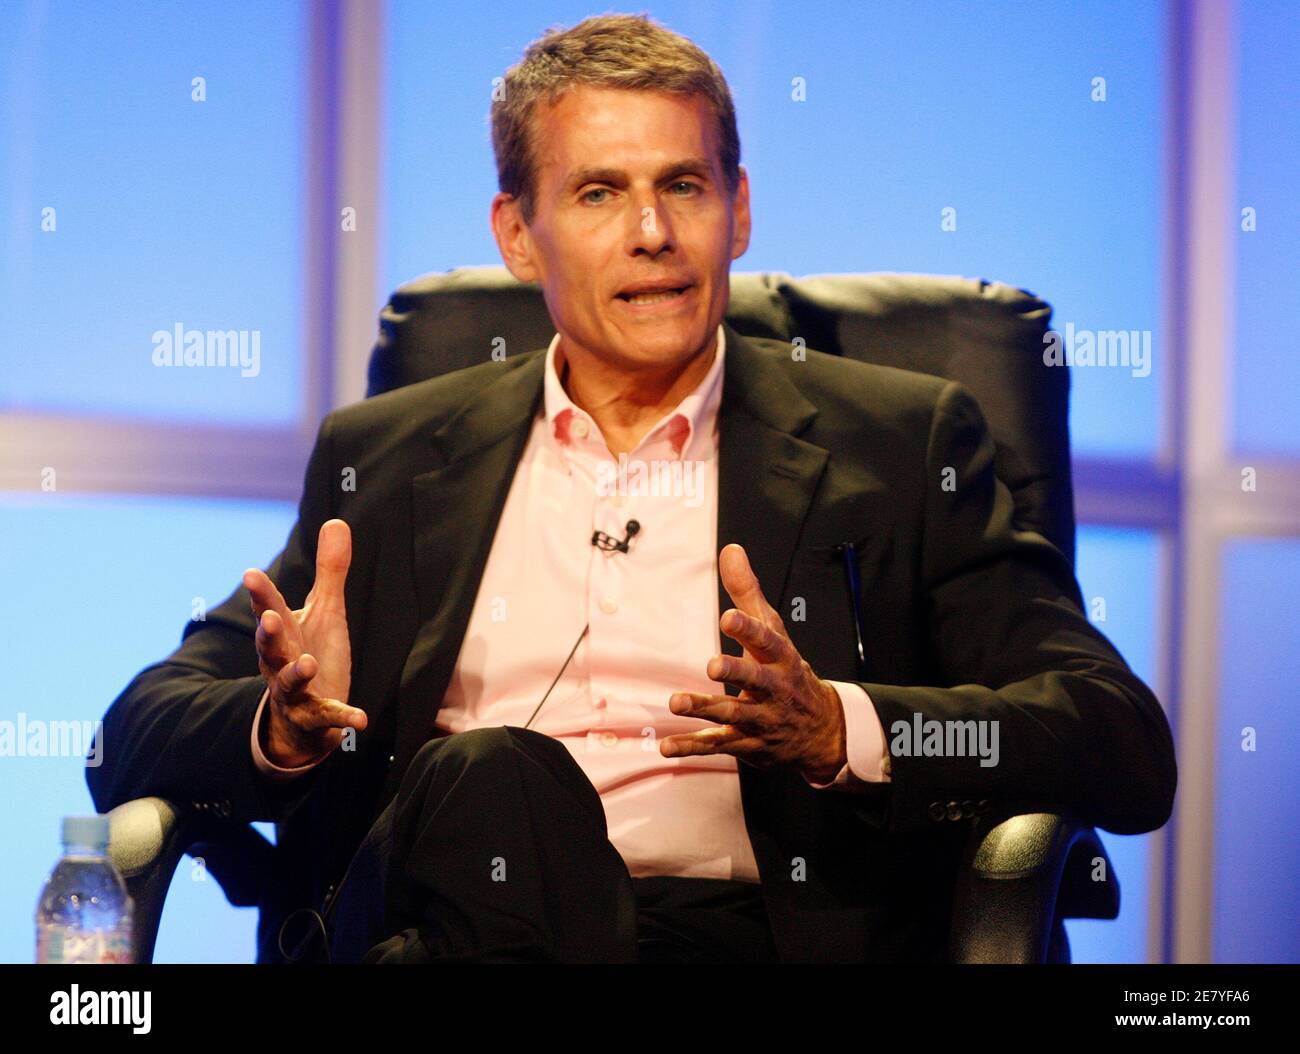 Michael Lombardo, president Programming Group and West Coast Operation of HBO, speaks during a question and answer session during HBO's panel presentation at the Television Critics Association summer press tour in Beverly Hills,California July 10, 2008. REUTERS/ Fred Prouser           (UNITED STATES) Stock Photo